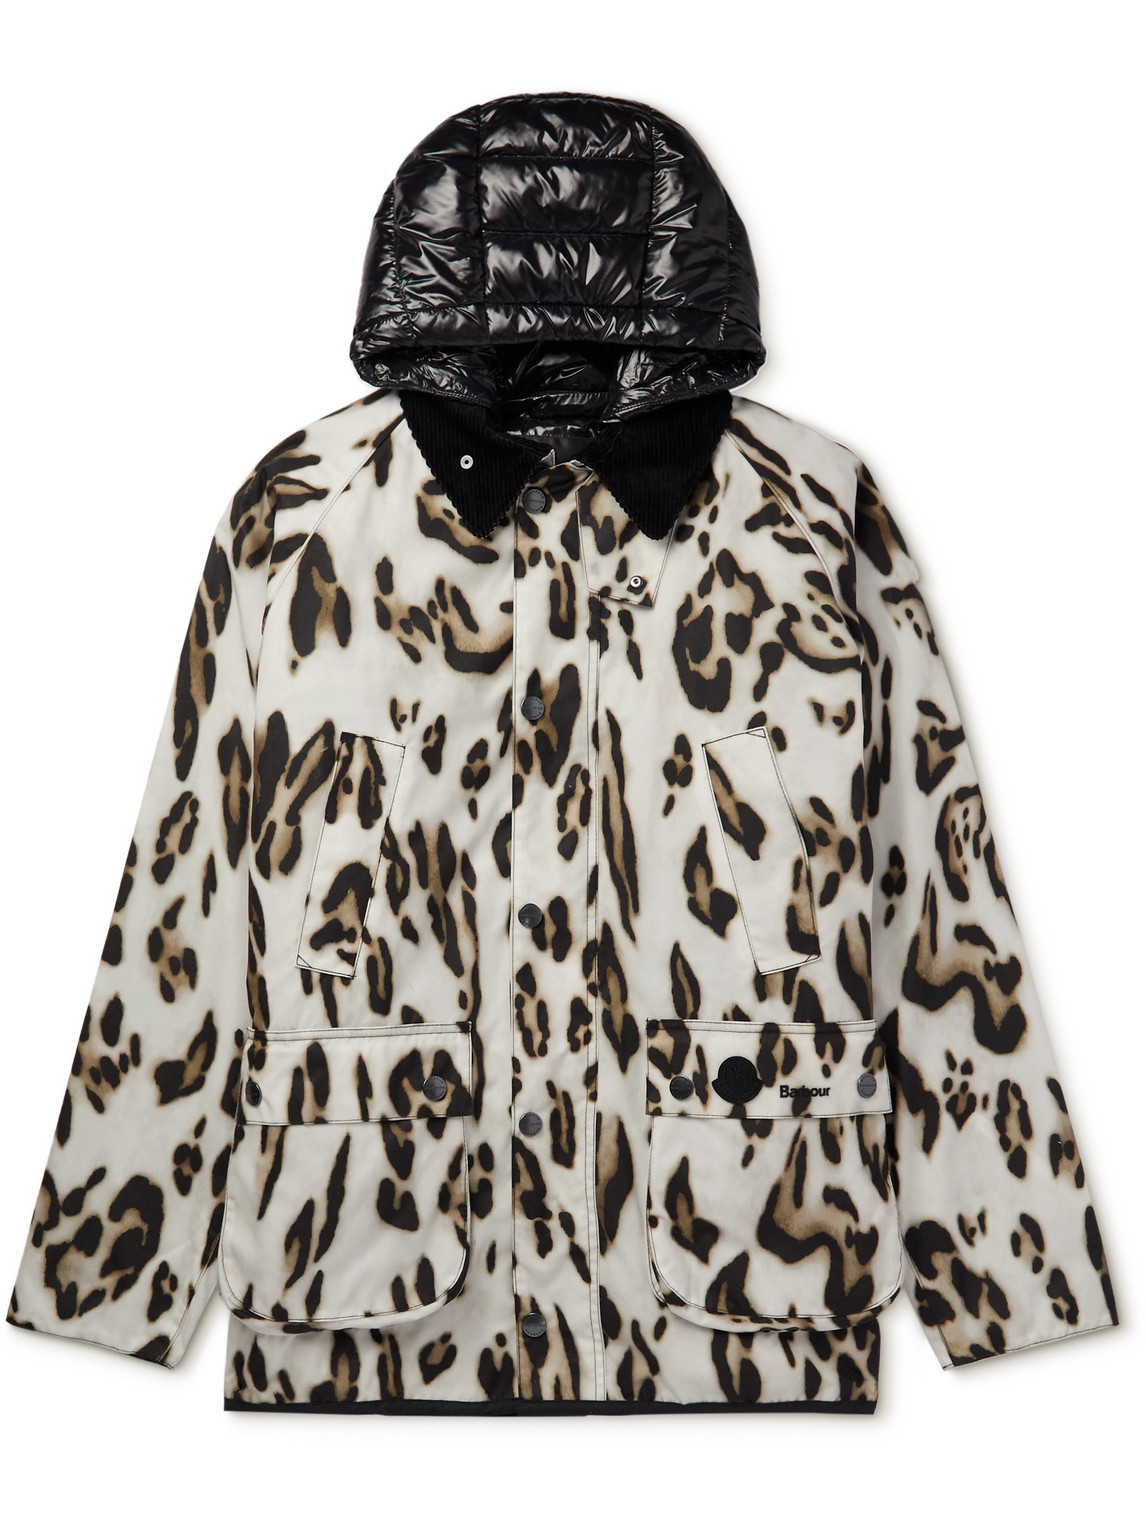 Moncler Genius Barbour 1952 Leopard-Print Shell Hooded Down Jacket